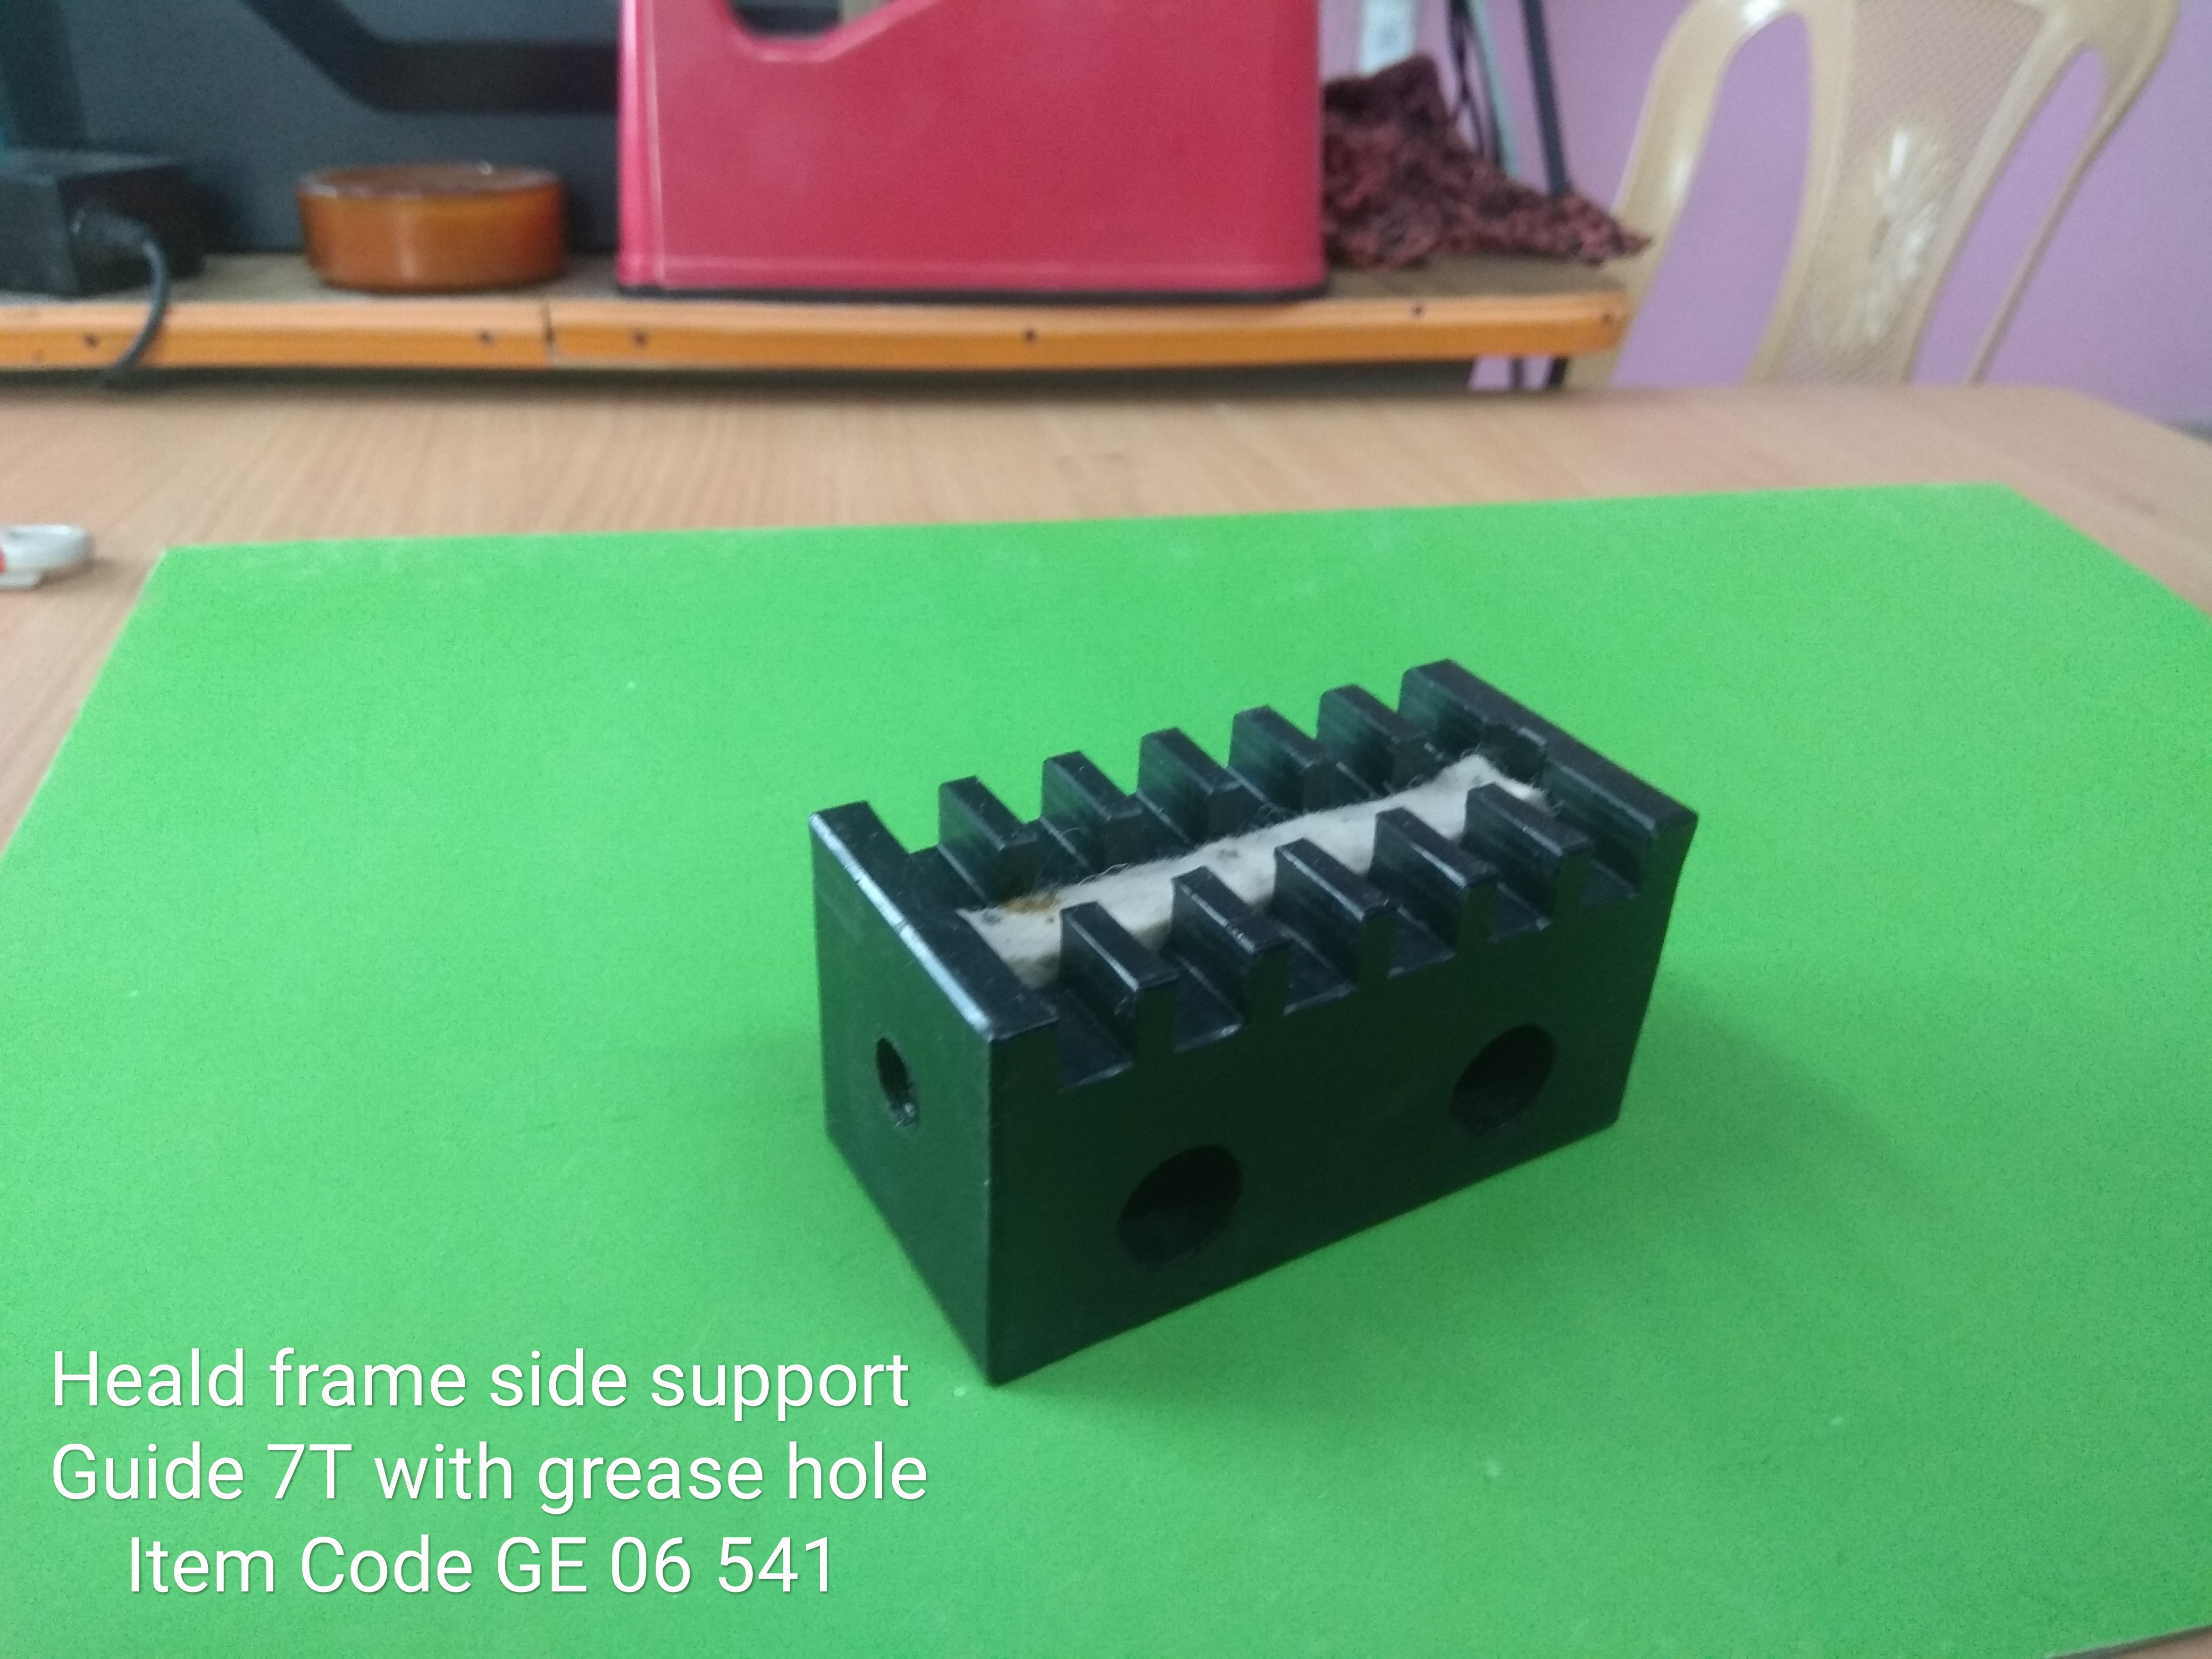 GE_06_541_Heald_Frame_Side_Support_Guide_7T_with_Grease_Hole_1_12.jpg